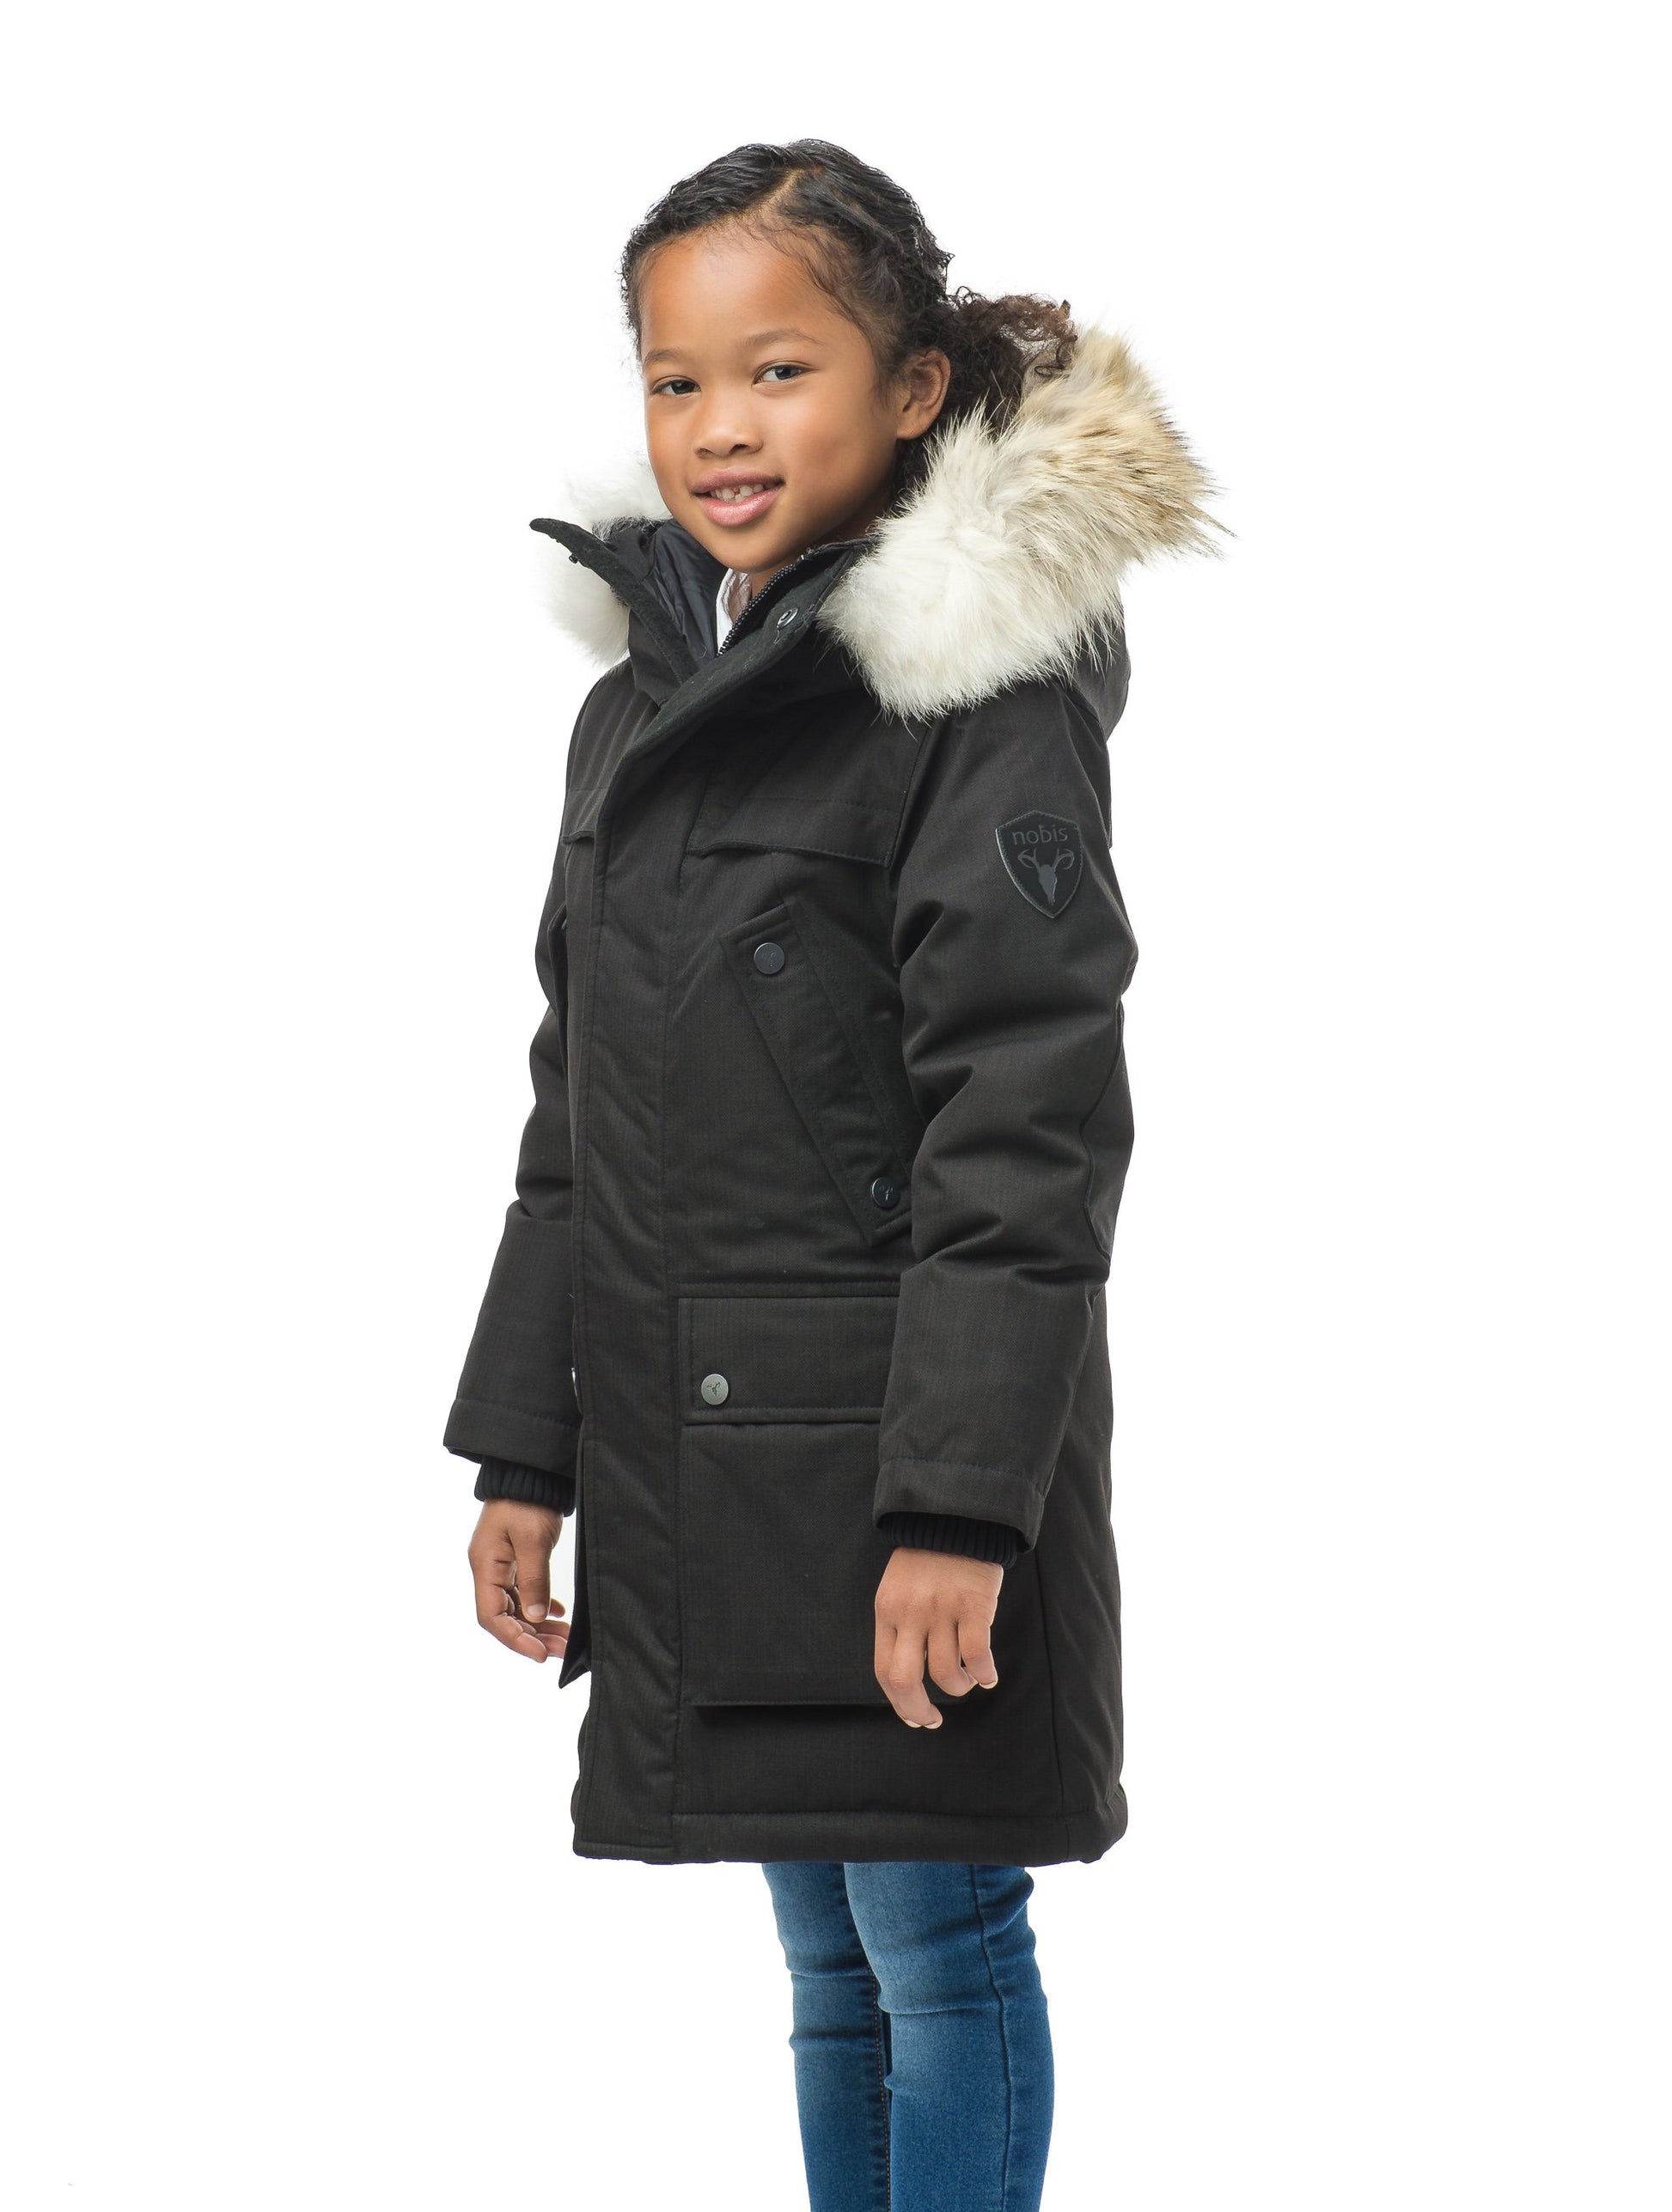 The best kid's down filled parka that's machine washable, waterproof, windproof and breathable in CH Black